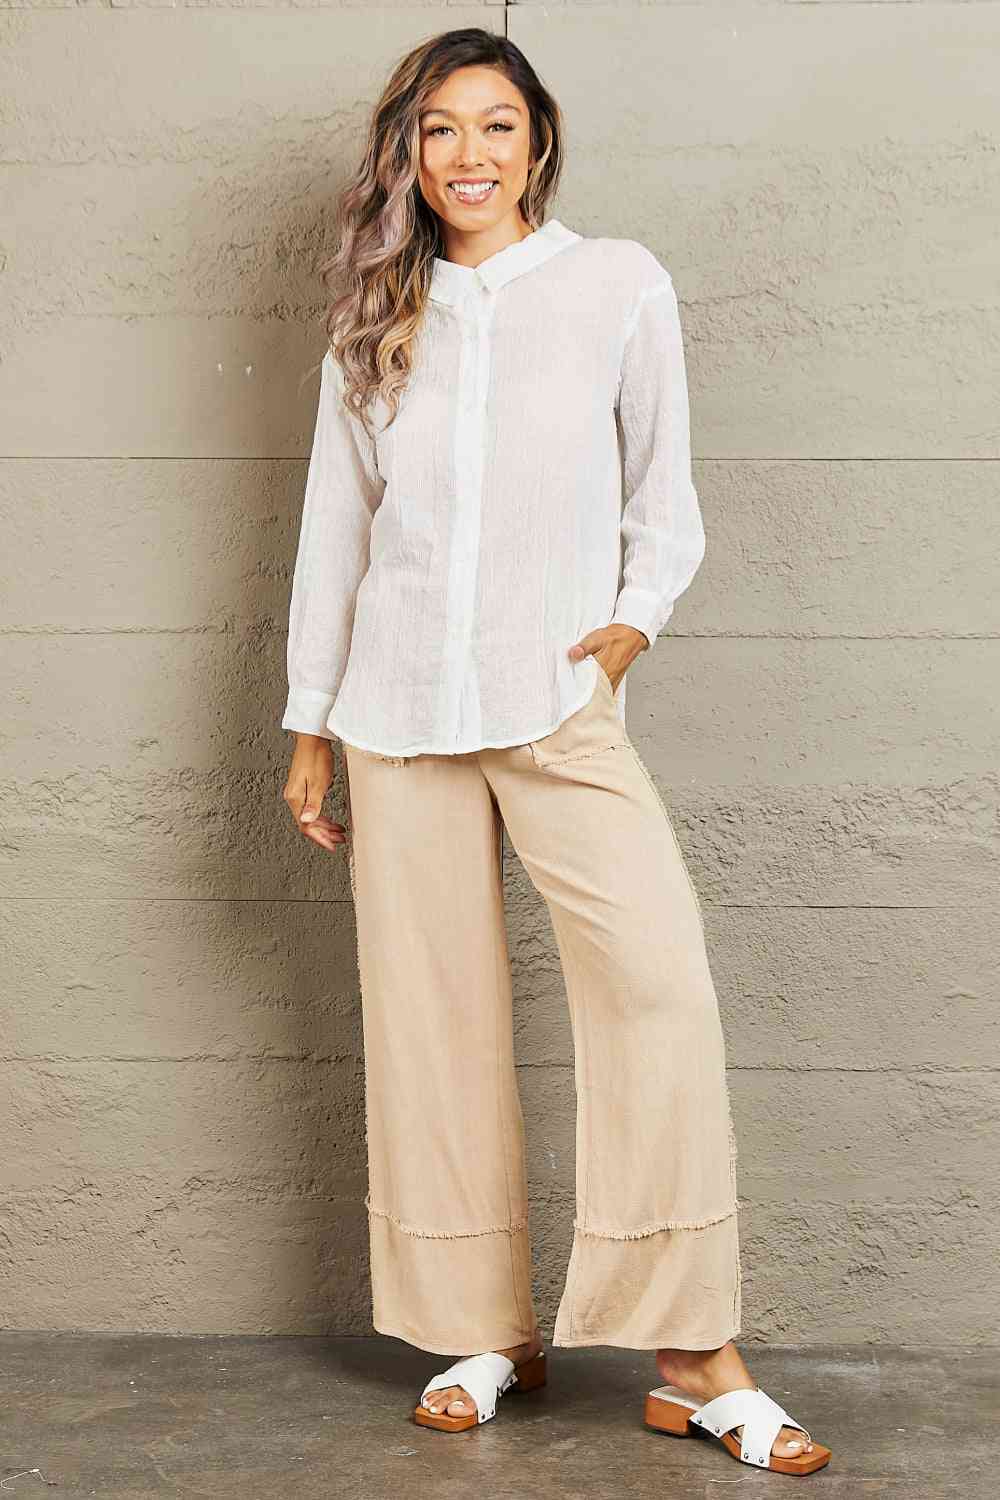 Take Me Out Lightweight Button Down Top - Camis & Tops - Shirts & Tops - 5 - 2024